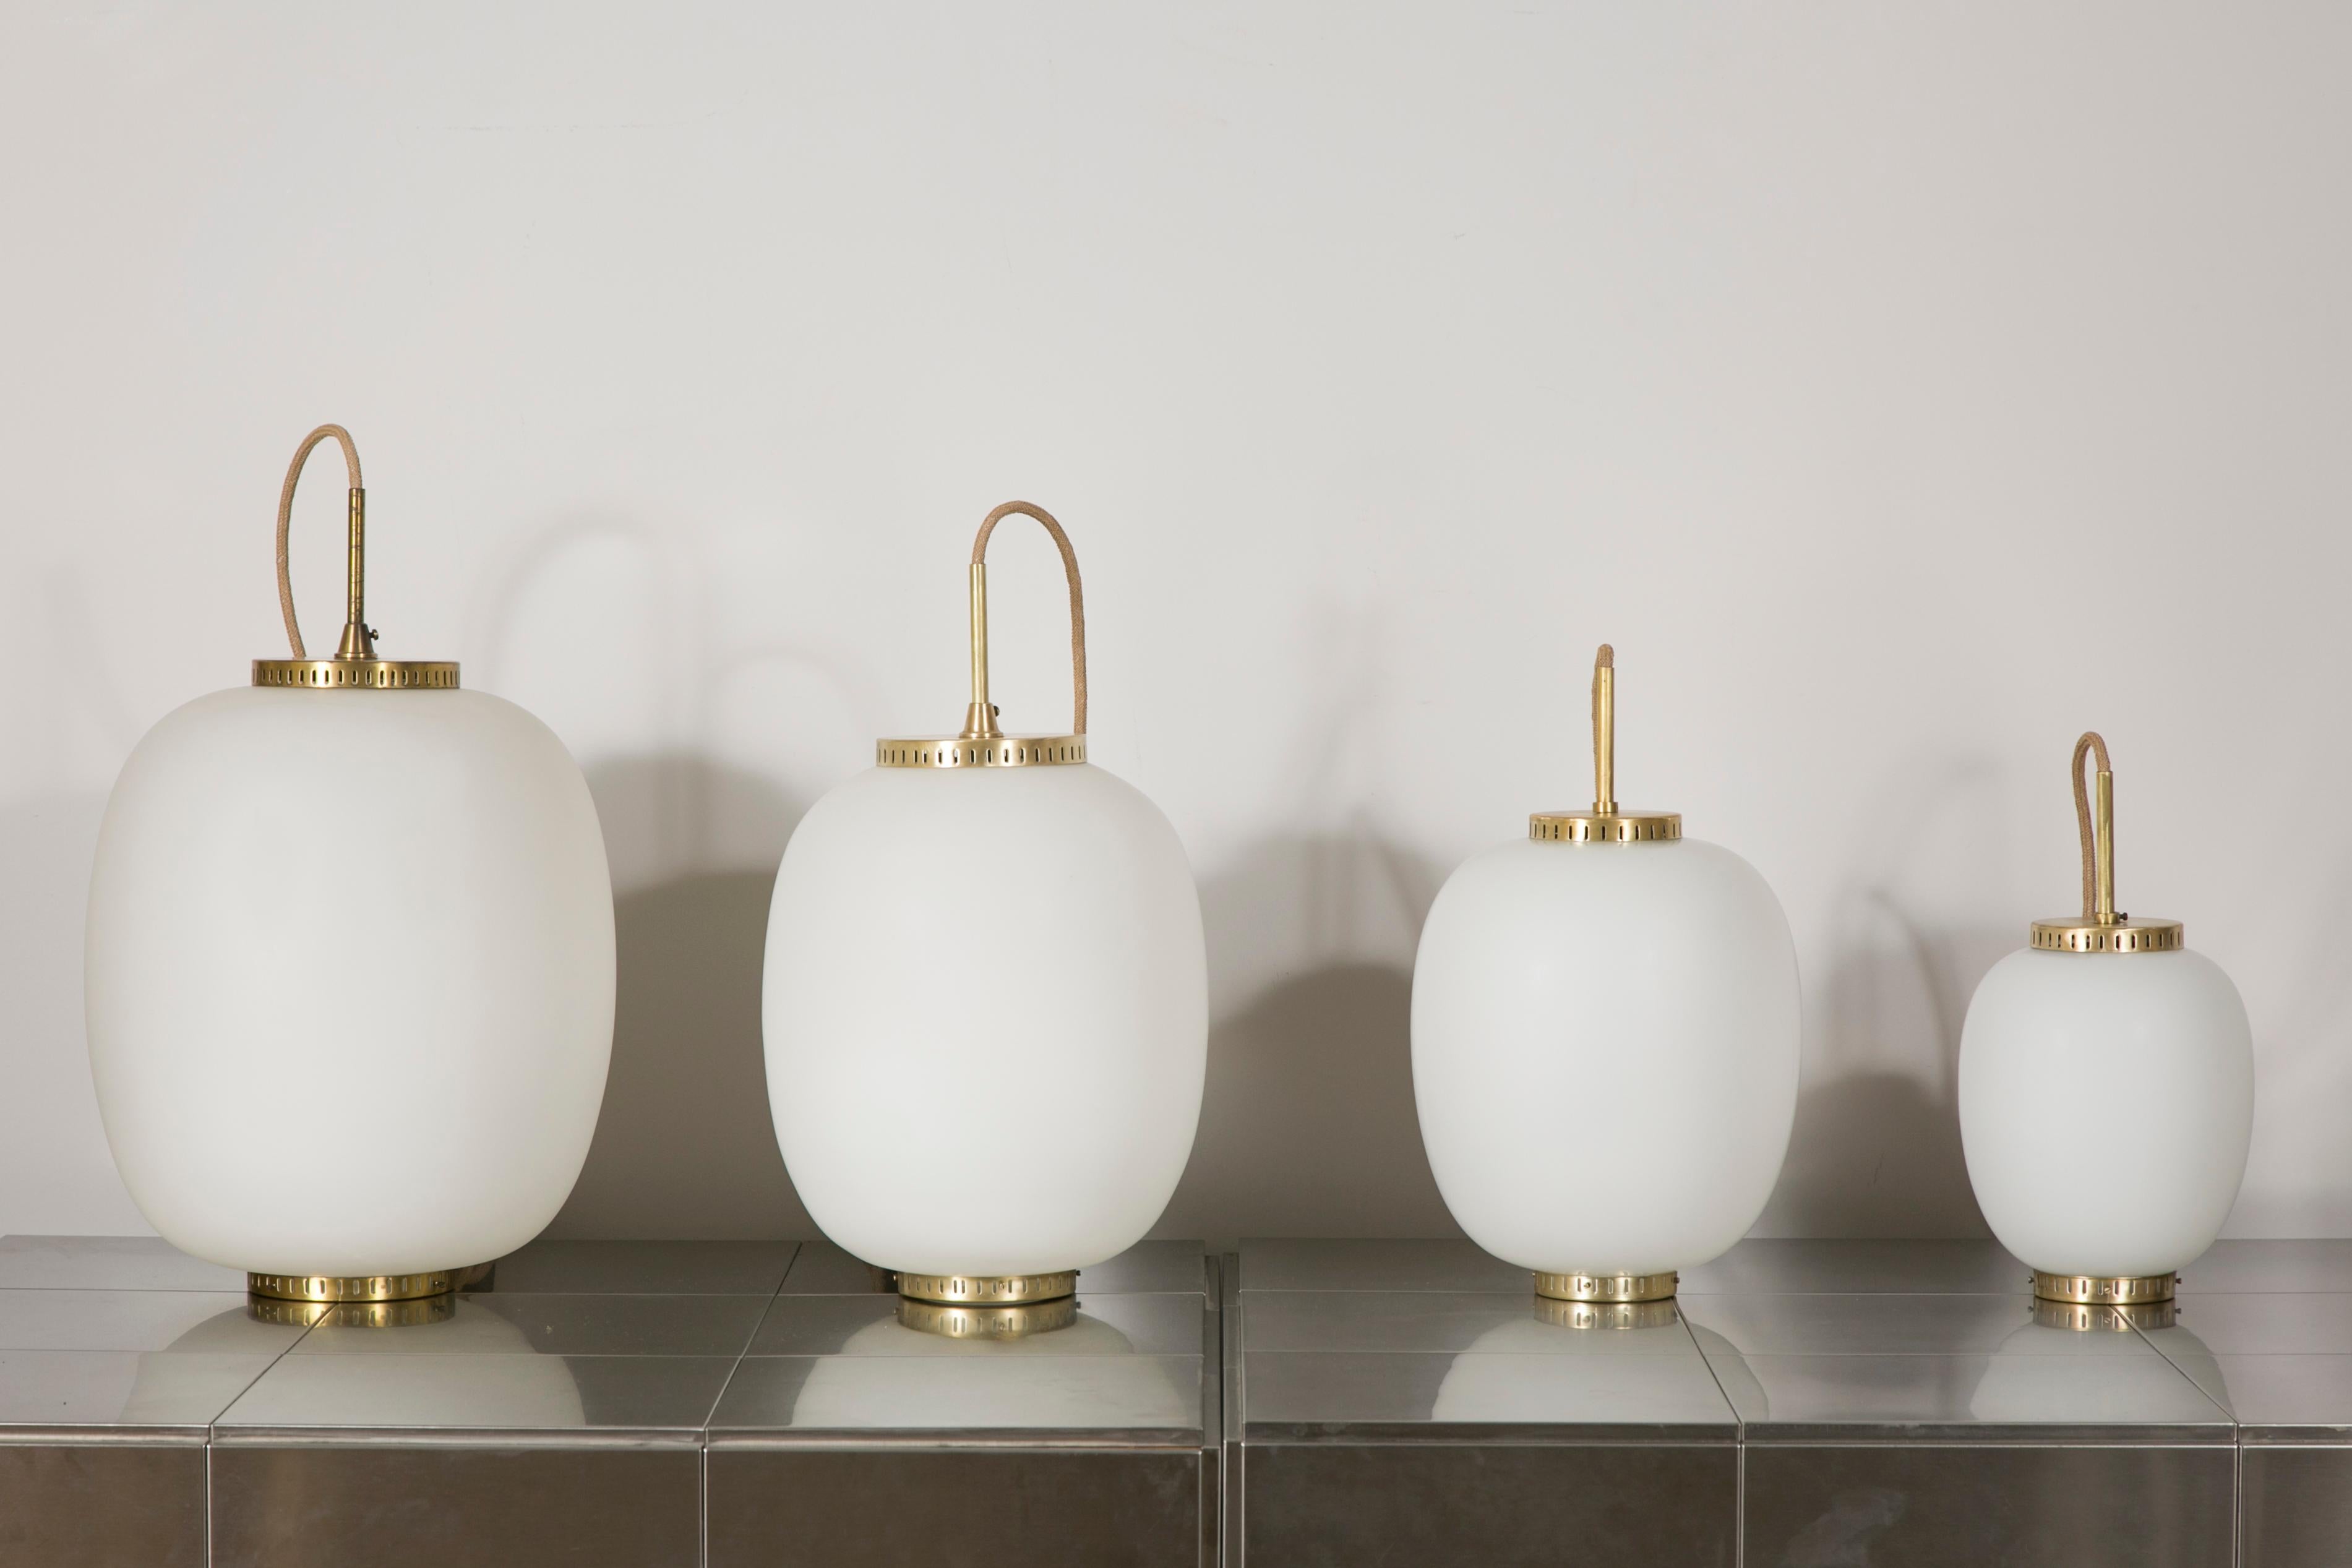 Collection of 3 opaline glass and brass ceiling fixtures.
See dimensions below 
By Bent Karlby for Lyfa. 
Denmark, late 1950s.

Various dimensions available: (Height of the opaline and brass disc) 
Medium (two items available): H 11.8 in. (30